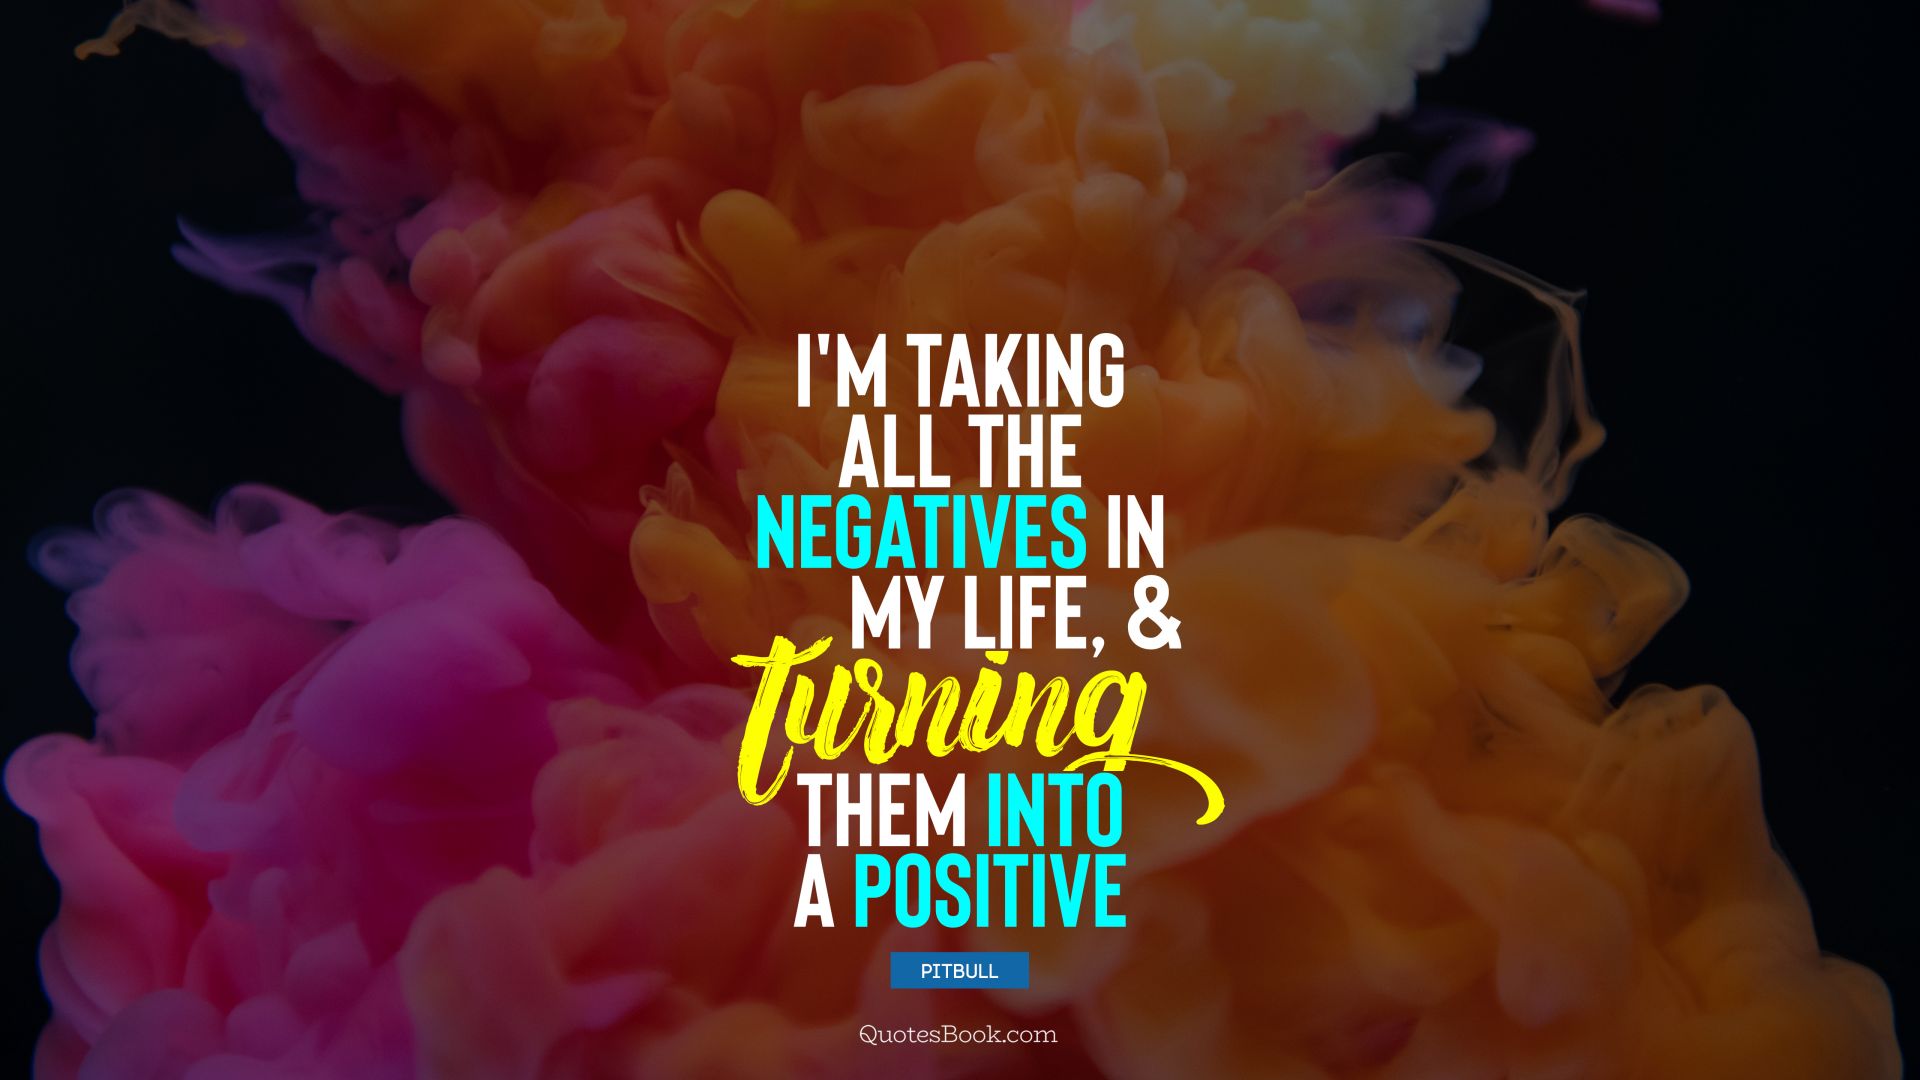 I'm taking all the negatives in my life, and turning them into a positive. - Quote by Pitbull 